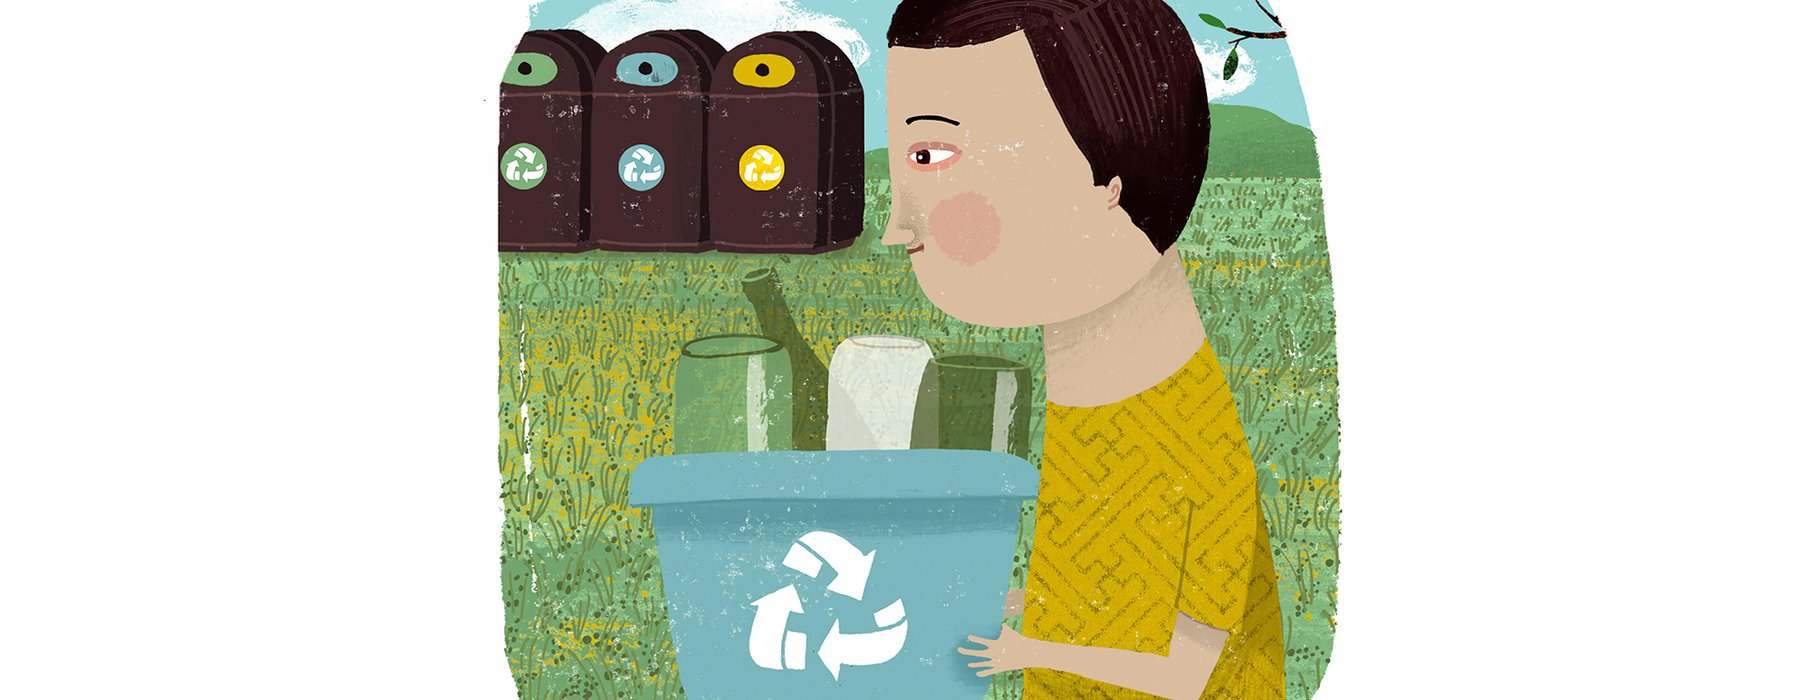 Illustration of recycling being taken out to bins by person